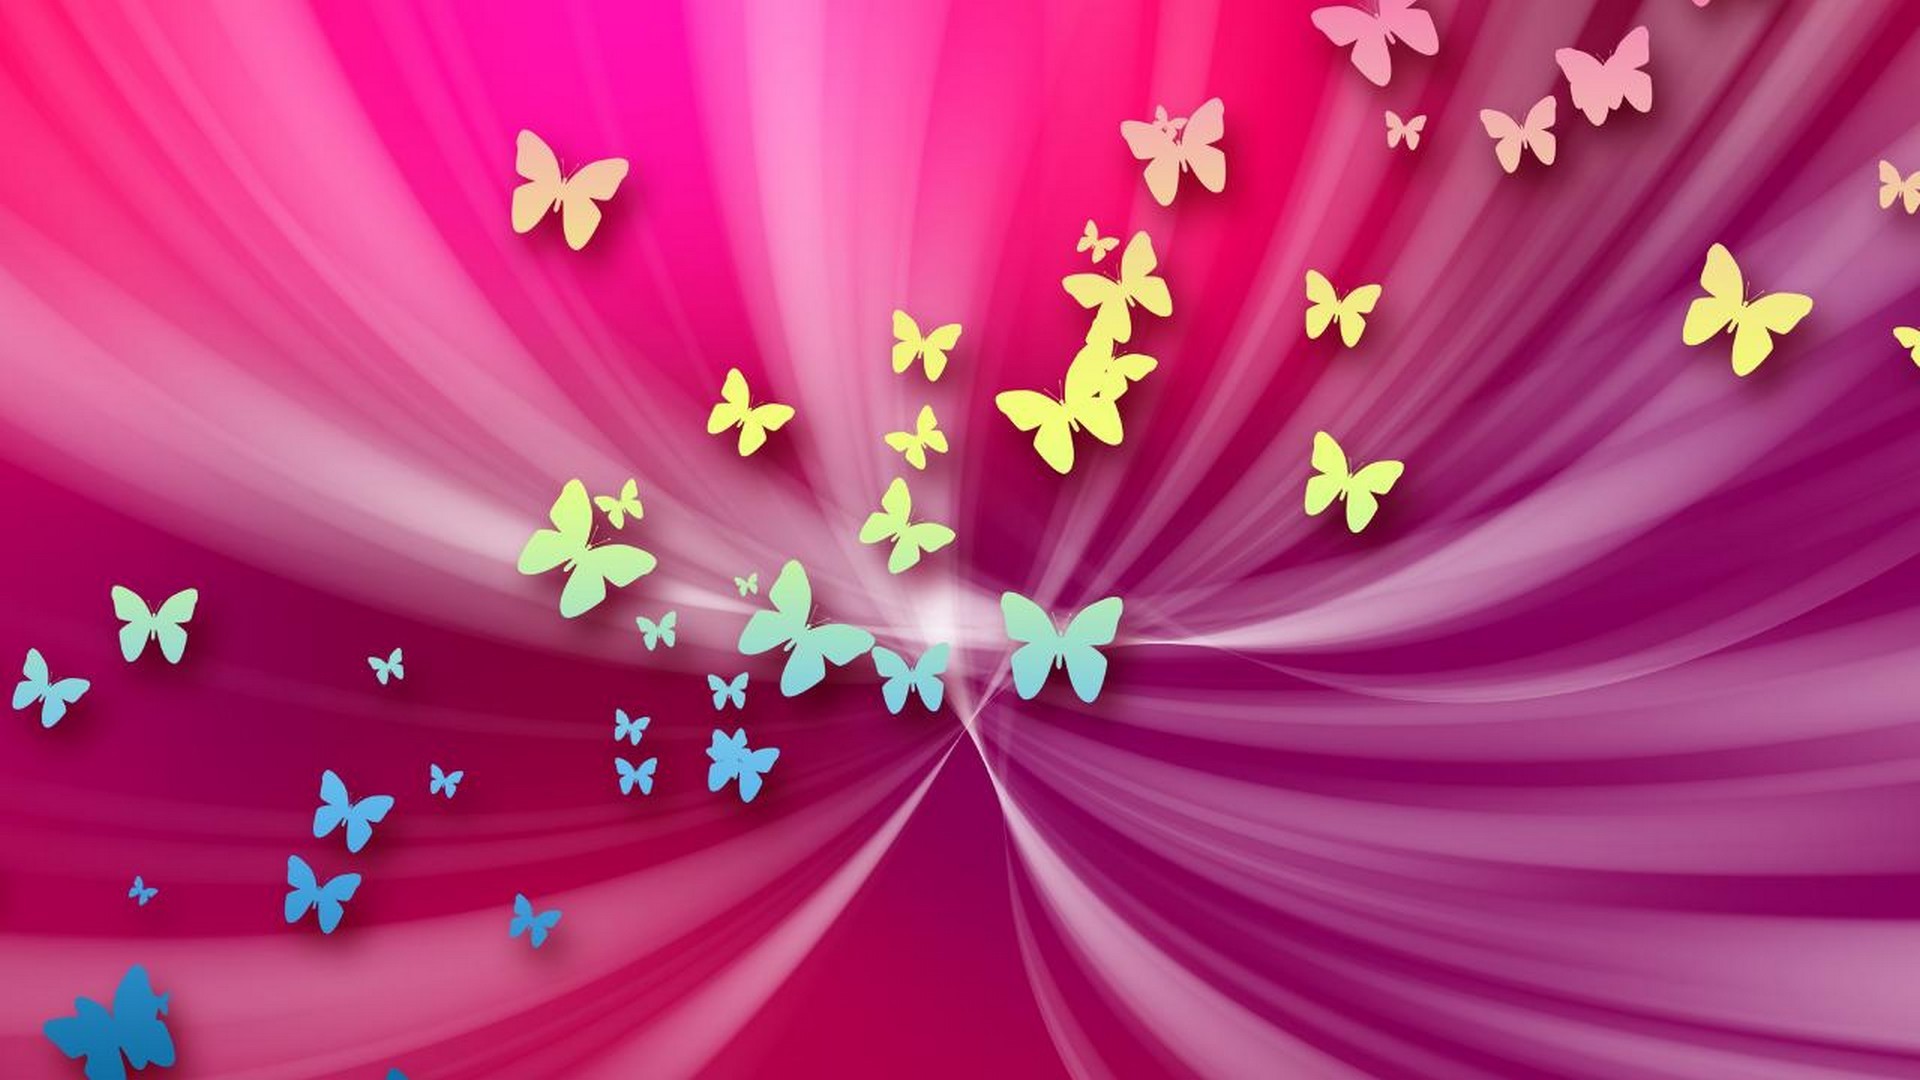 HD Pink Butterfly Backgrounds Resolution 1920x1080